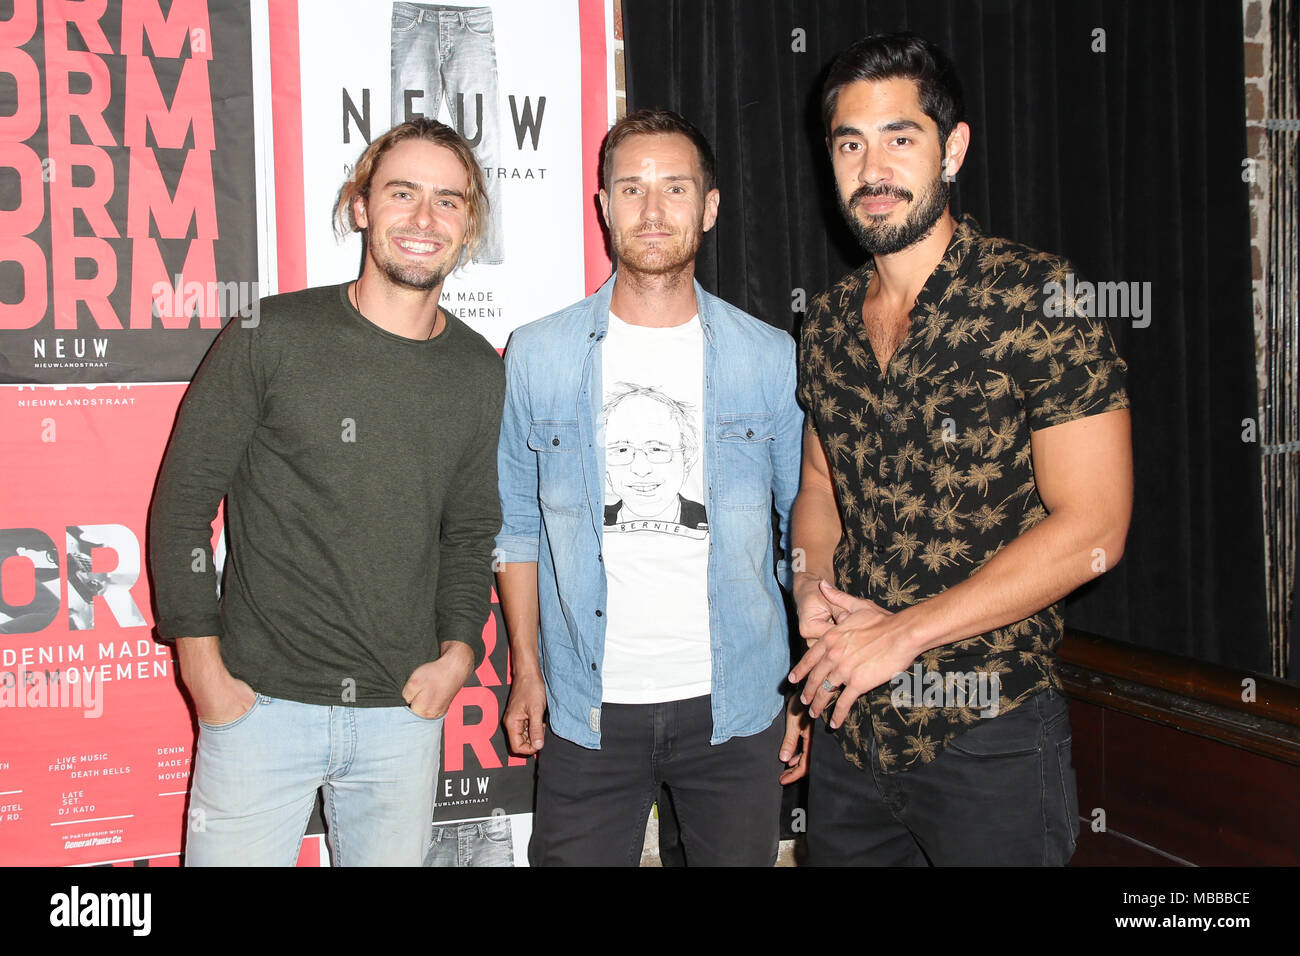 Sydney, Australia. 10 April 2018. Local celebrities and VIPs attend the Neuw Denim form party at The Lansdowne, Sydney. Pictured: Alec Snow, Benedict Wall and Tai Hara. Credit: Richard Milnes/Alamy Live News Stock Photo